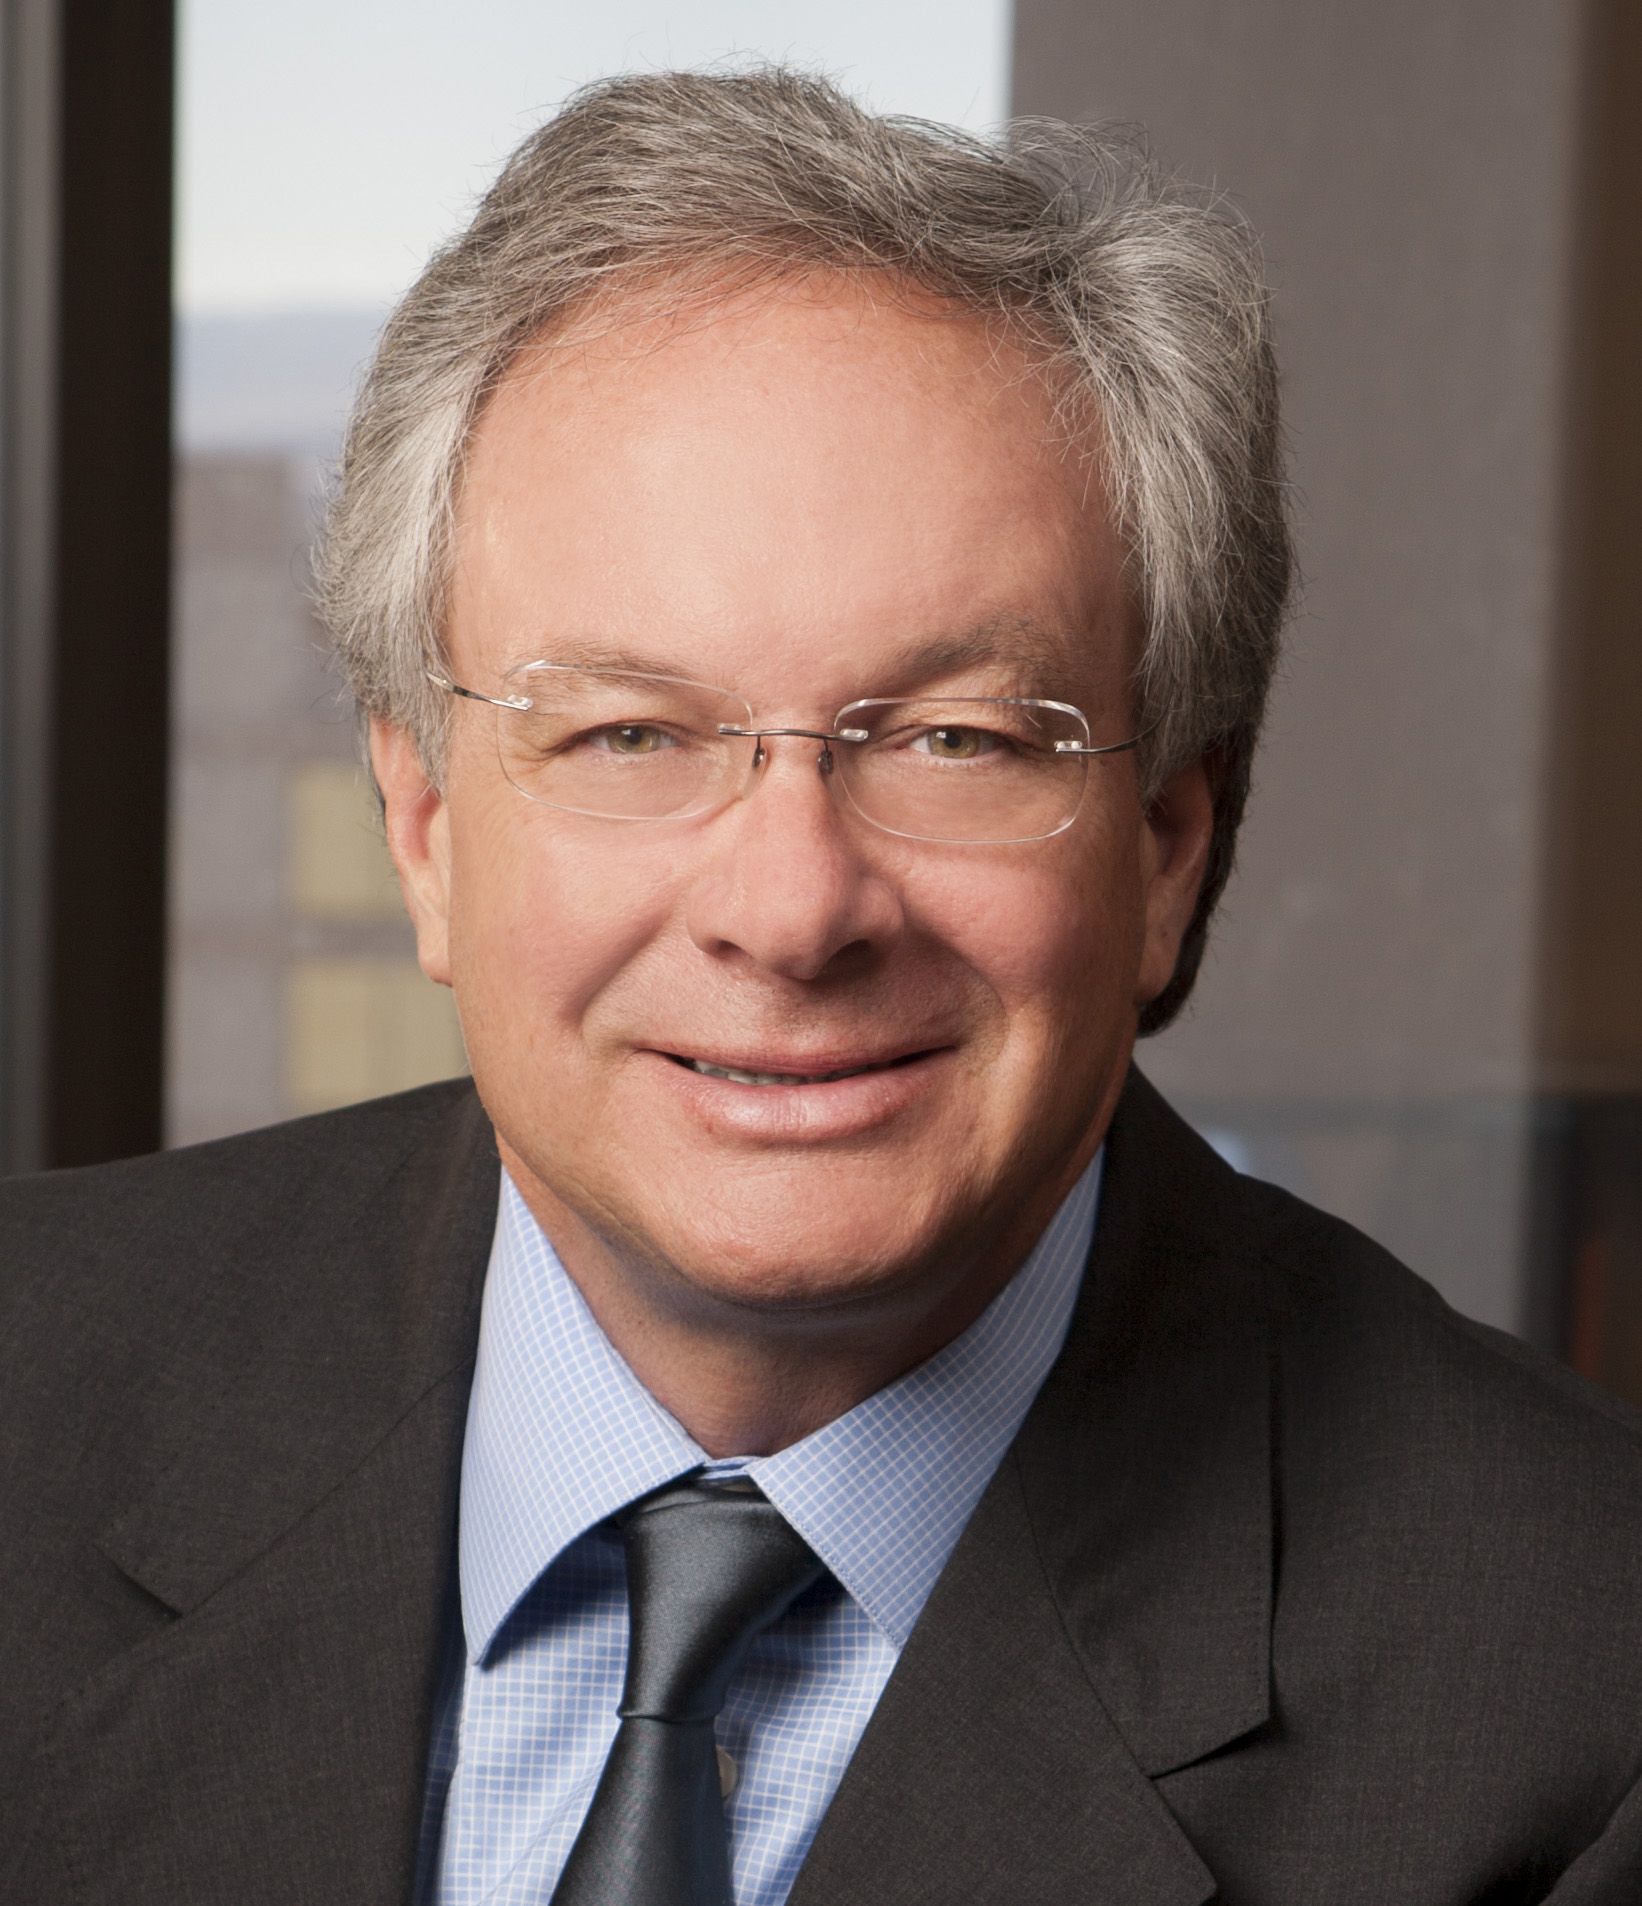 Louis Navellier, Chief Investment Officer